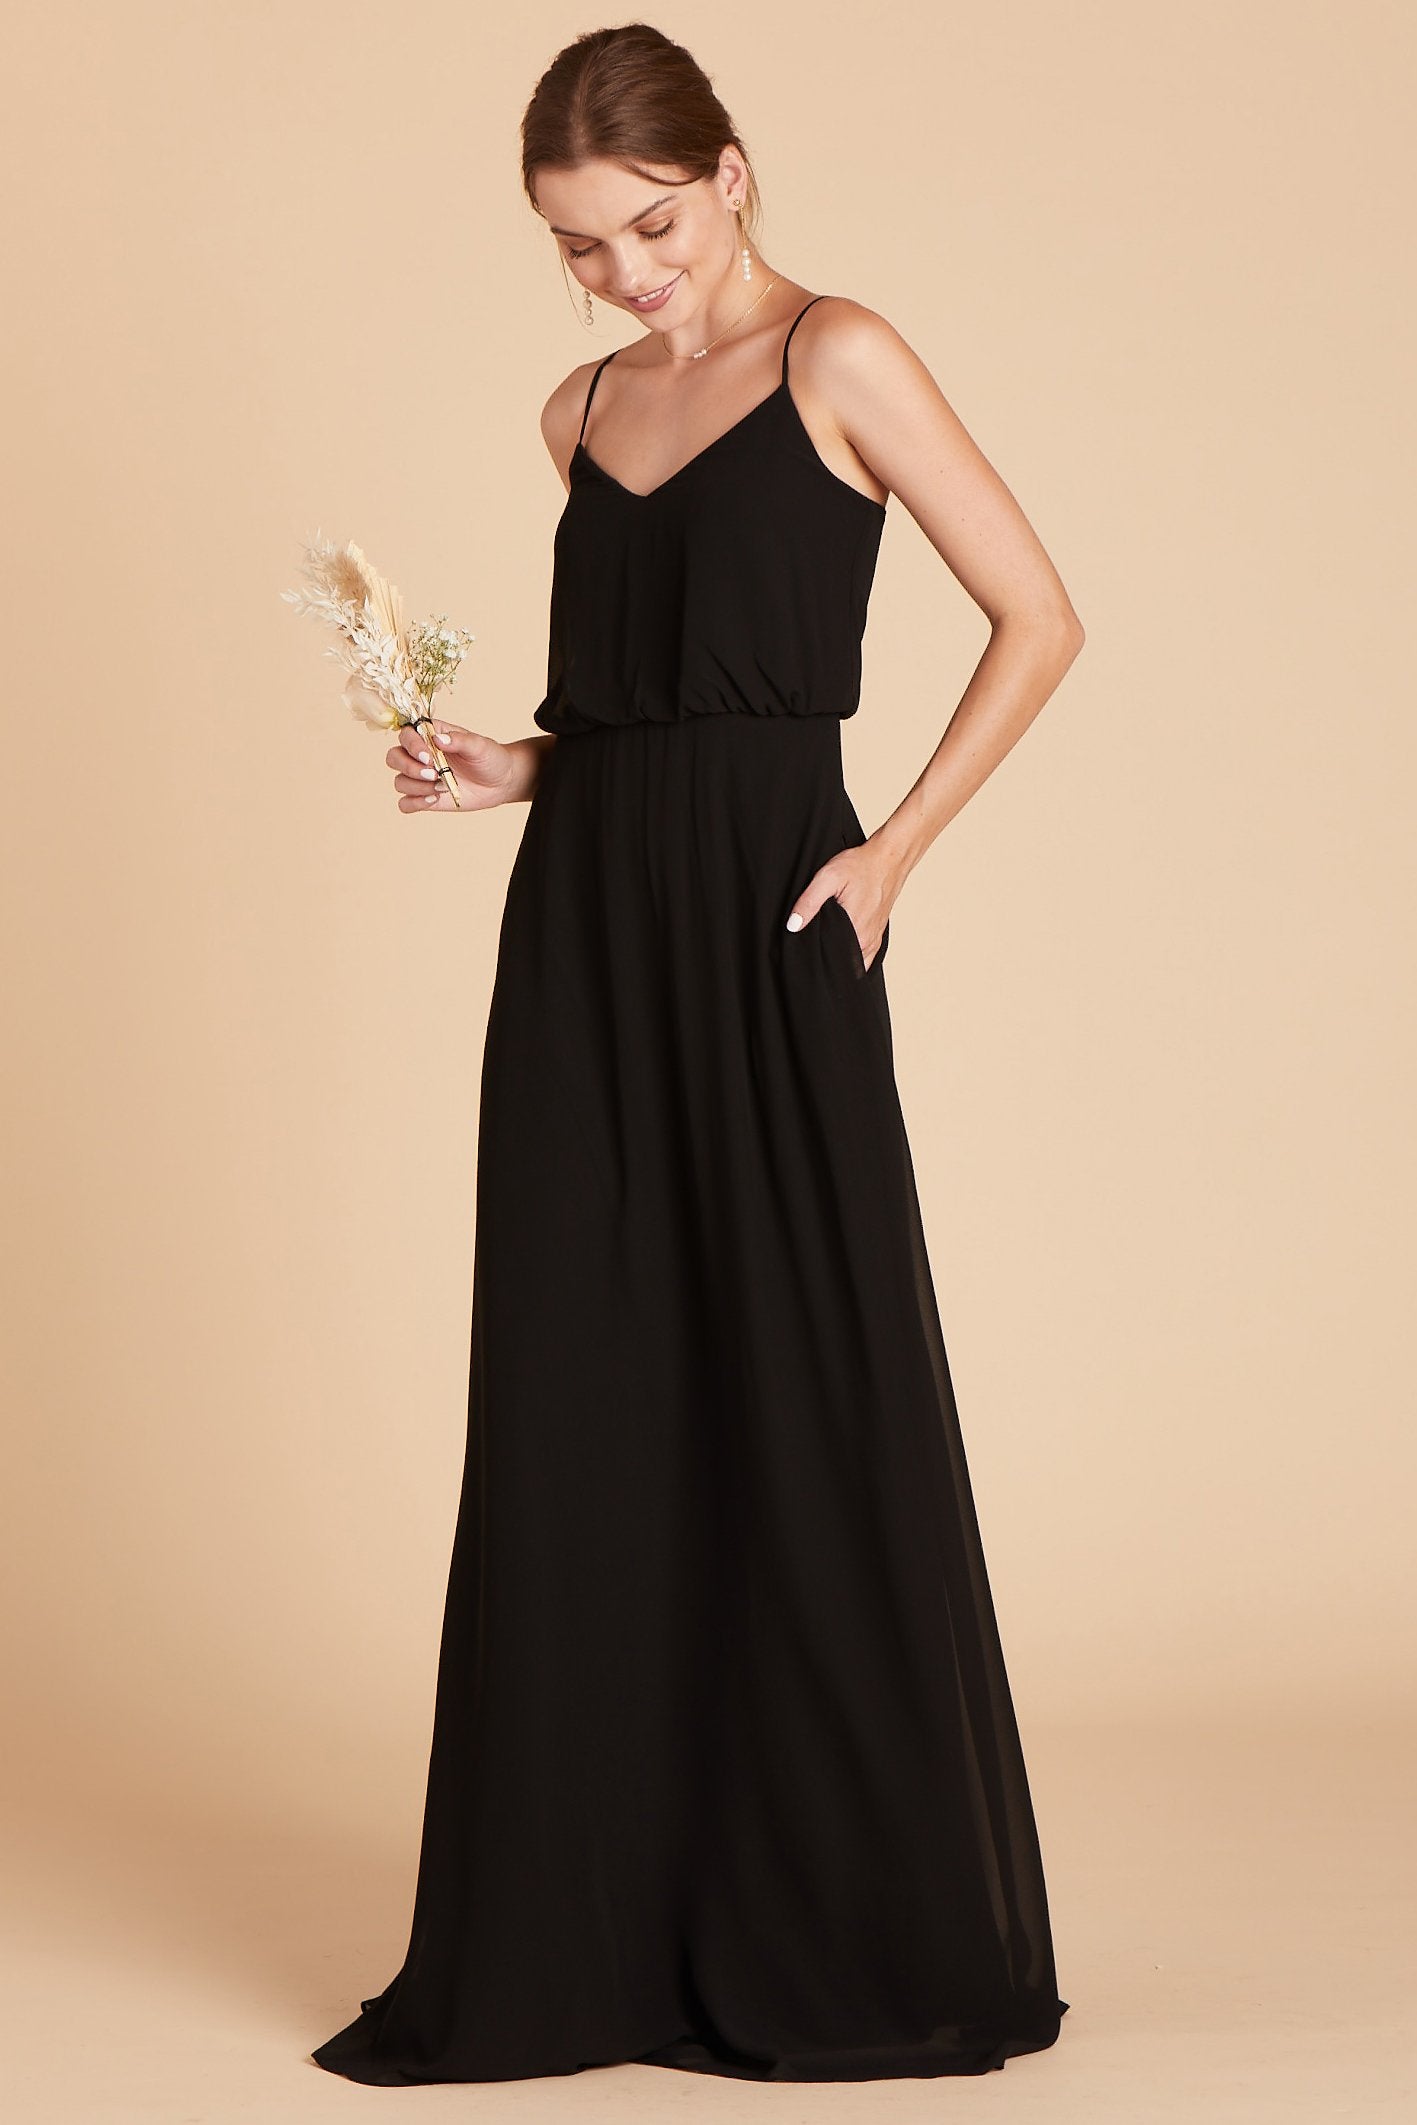 Gwennie bridesmaid dress in black chiffon by Birdy Grey, front view with hand in pocket